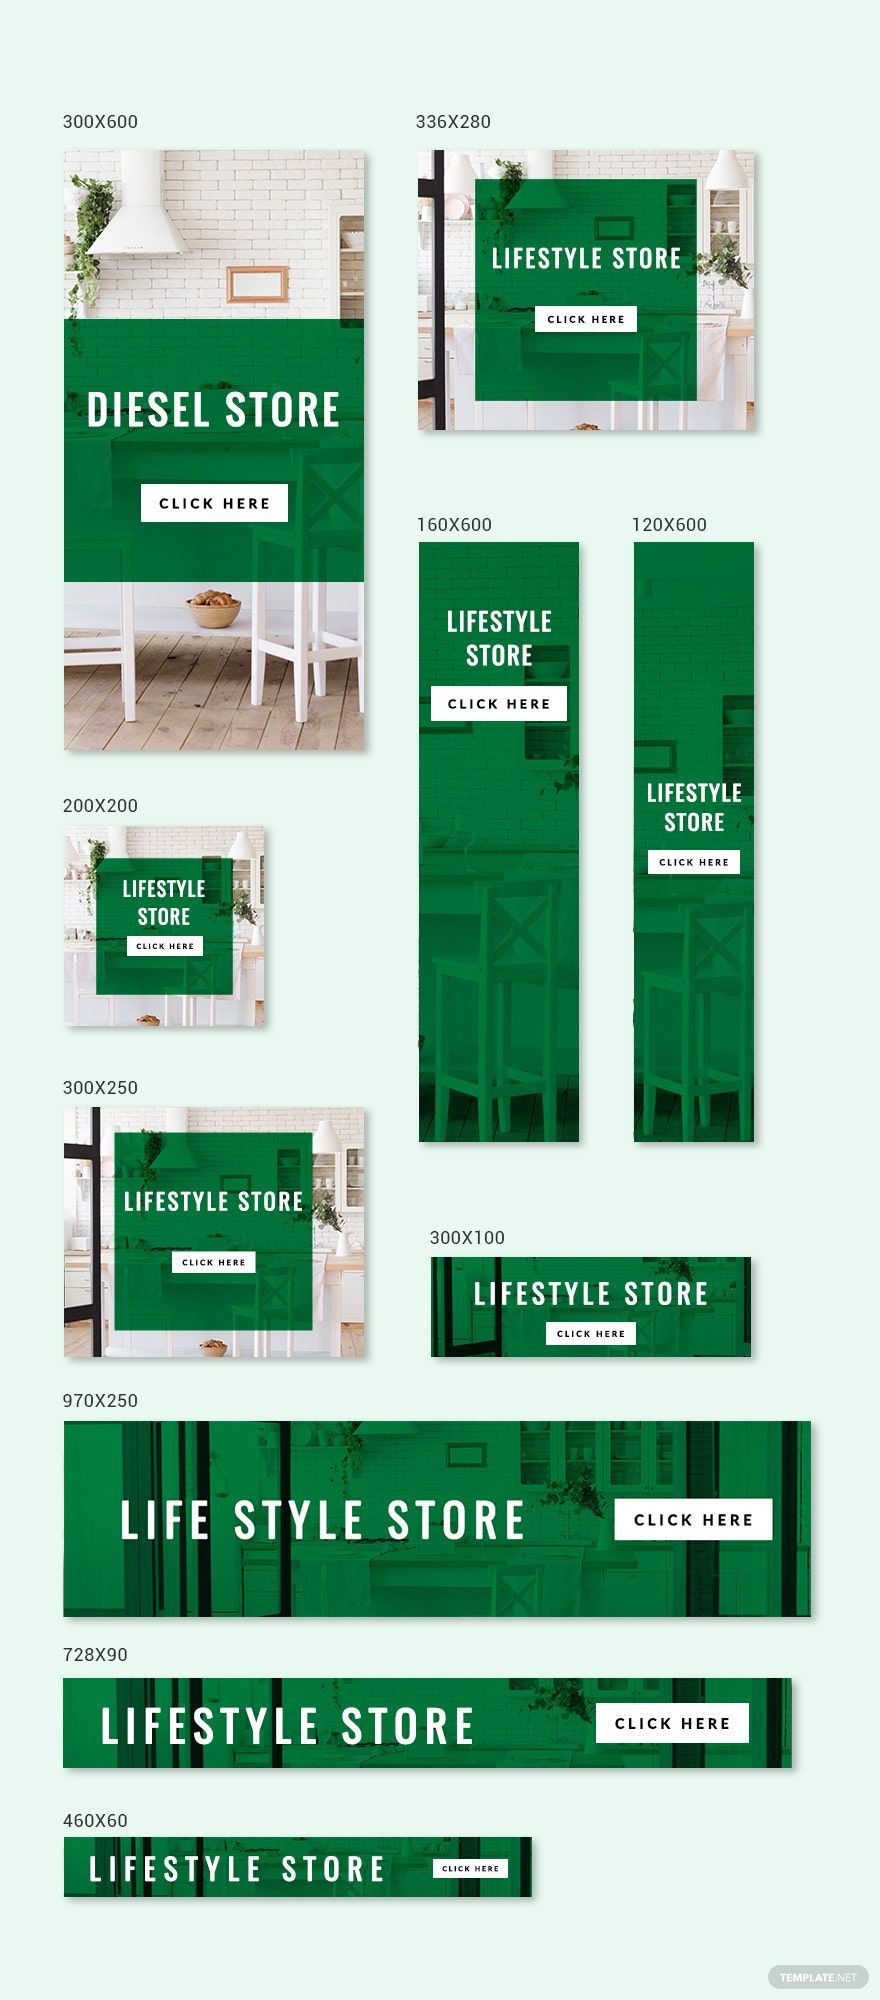 Lifestyle Banner Ads Template in PSD